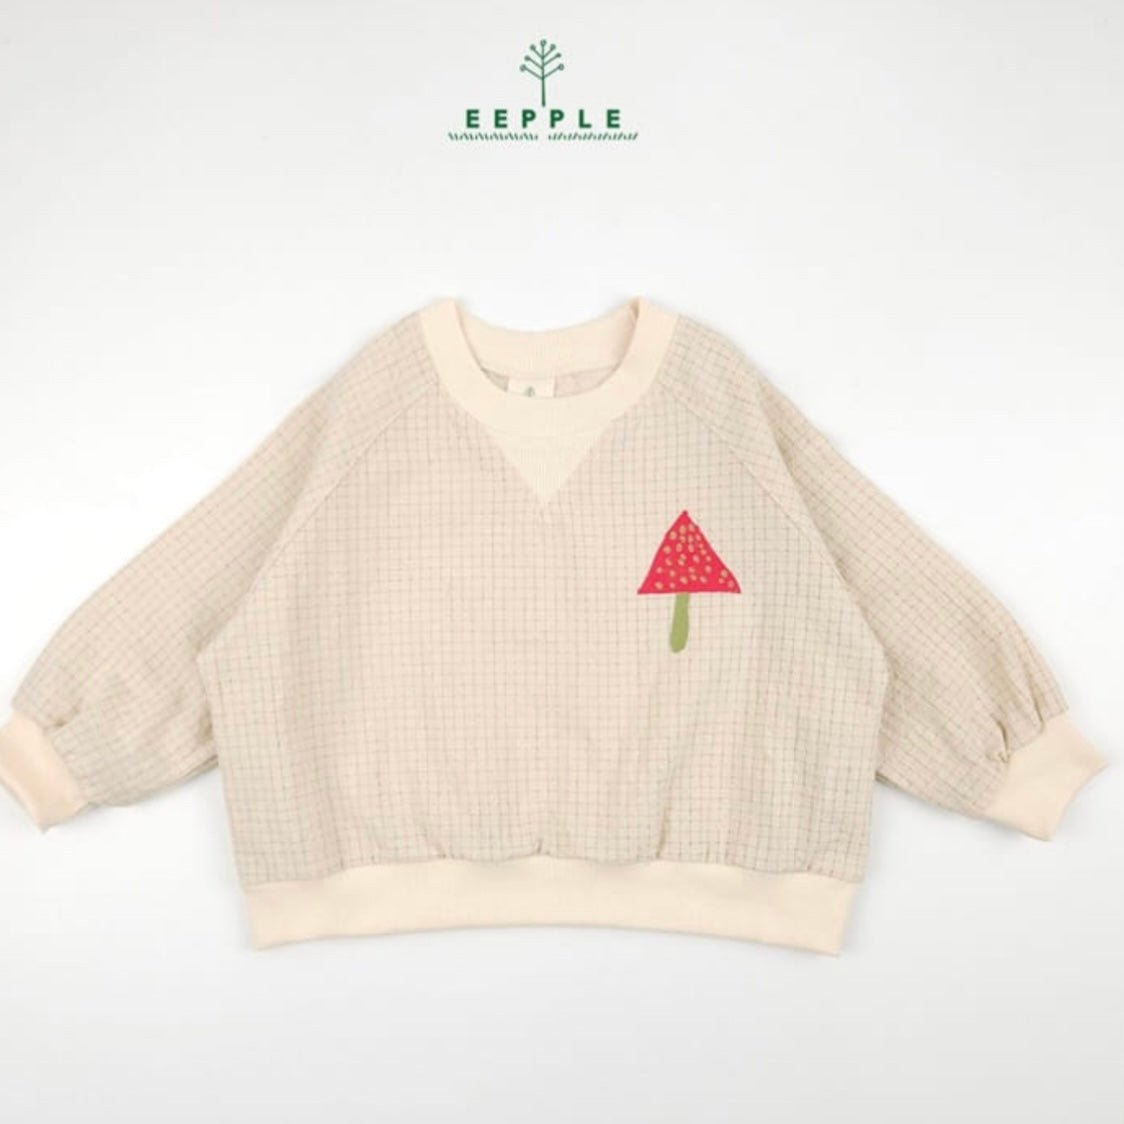 V Sweatshirt find Stylish Fashion for Little People- at Little Foxx Concept Store